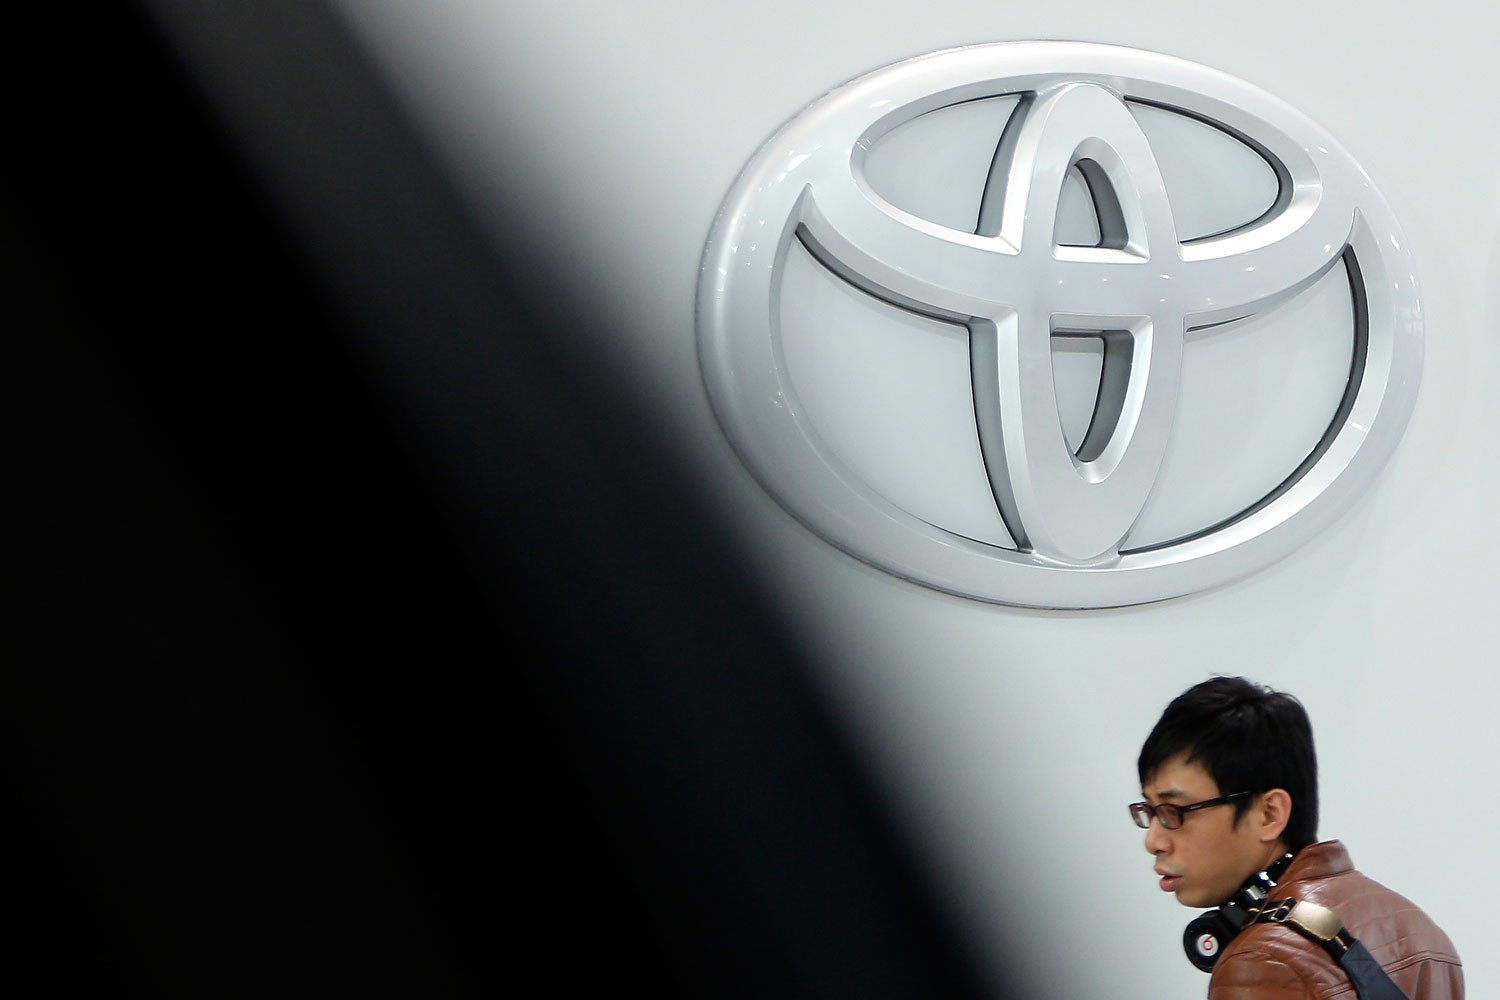 A visitor passes the Toyota Motor Corp. logo on display at the company's showroom in Tokyo, Japan, Feb. 12, 2014.